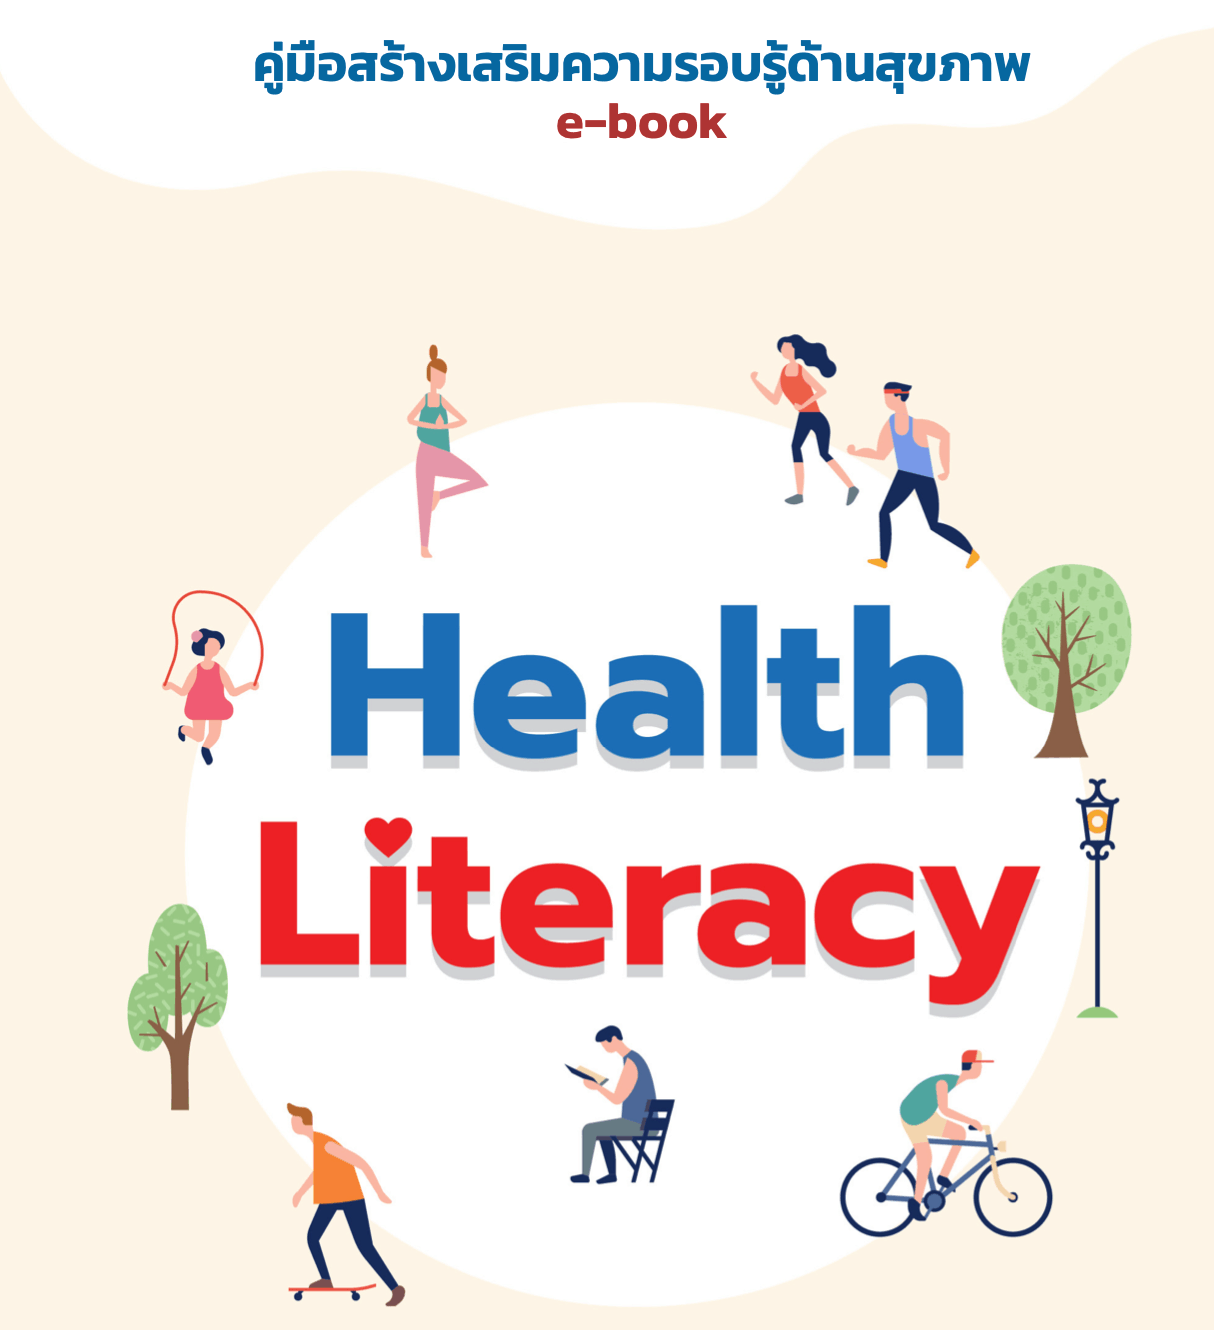 health literacy thesis